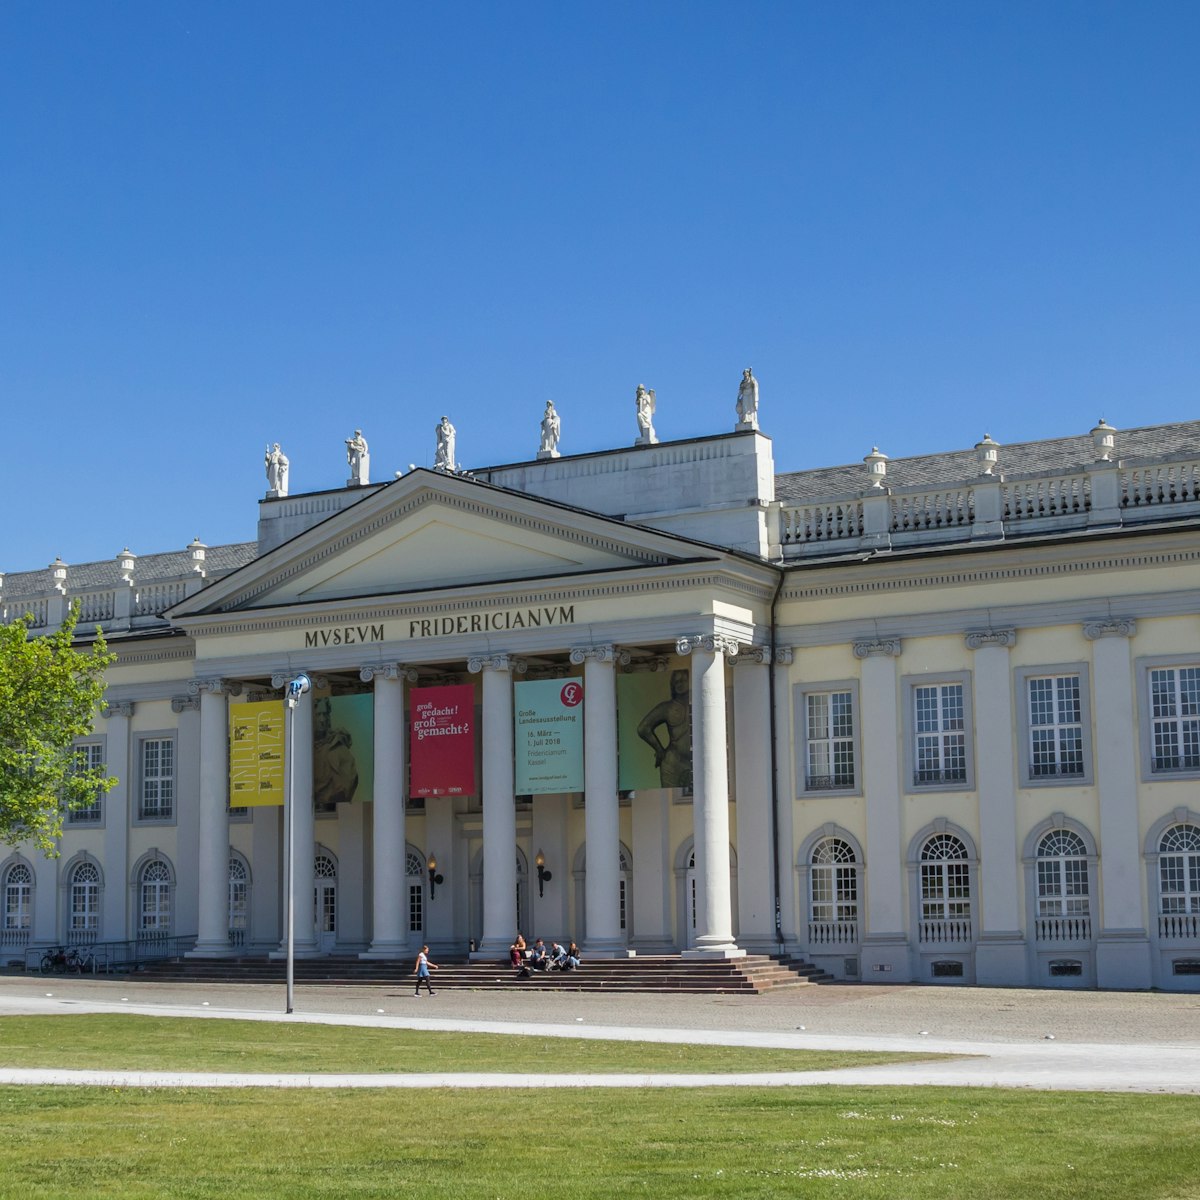 The Fridericianum museum in the center of Kassel, Germany.